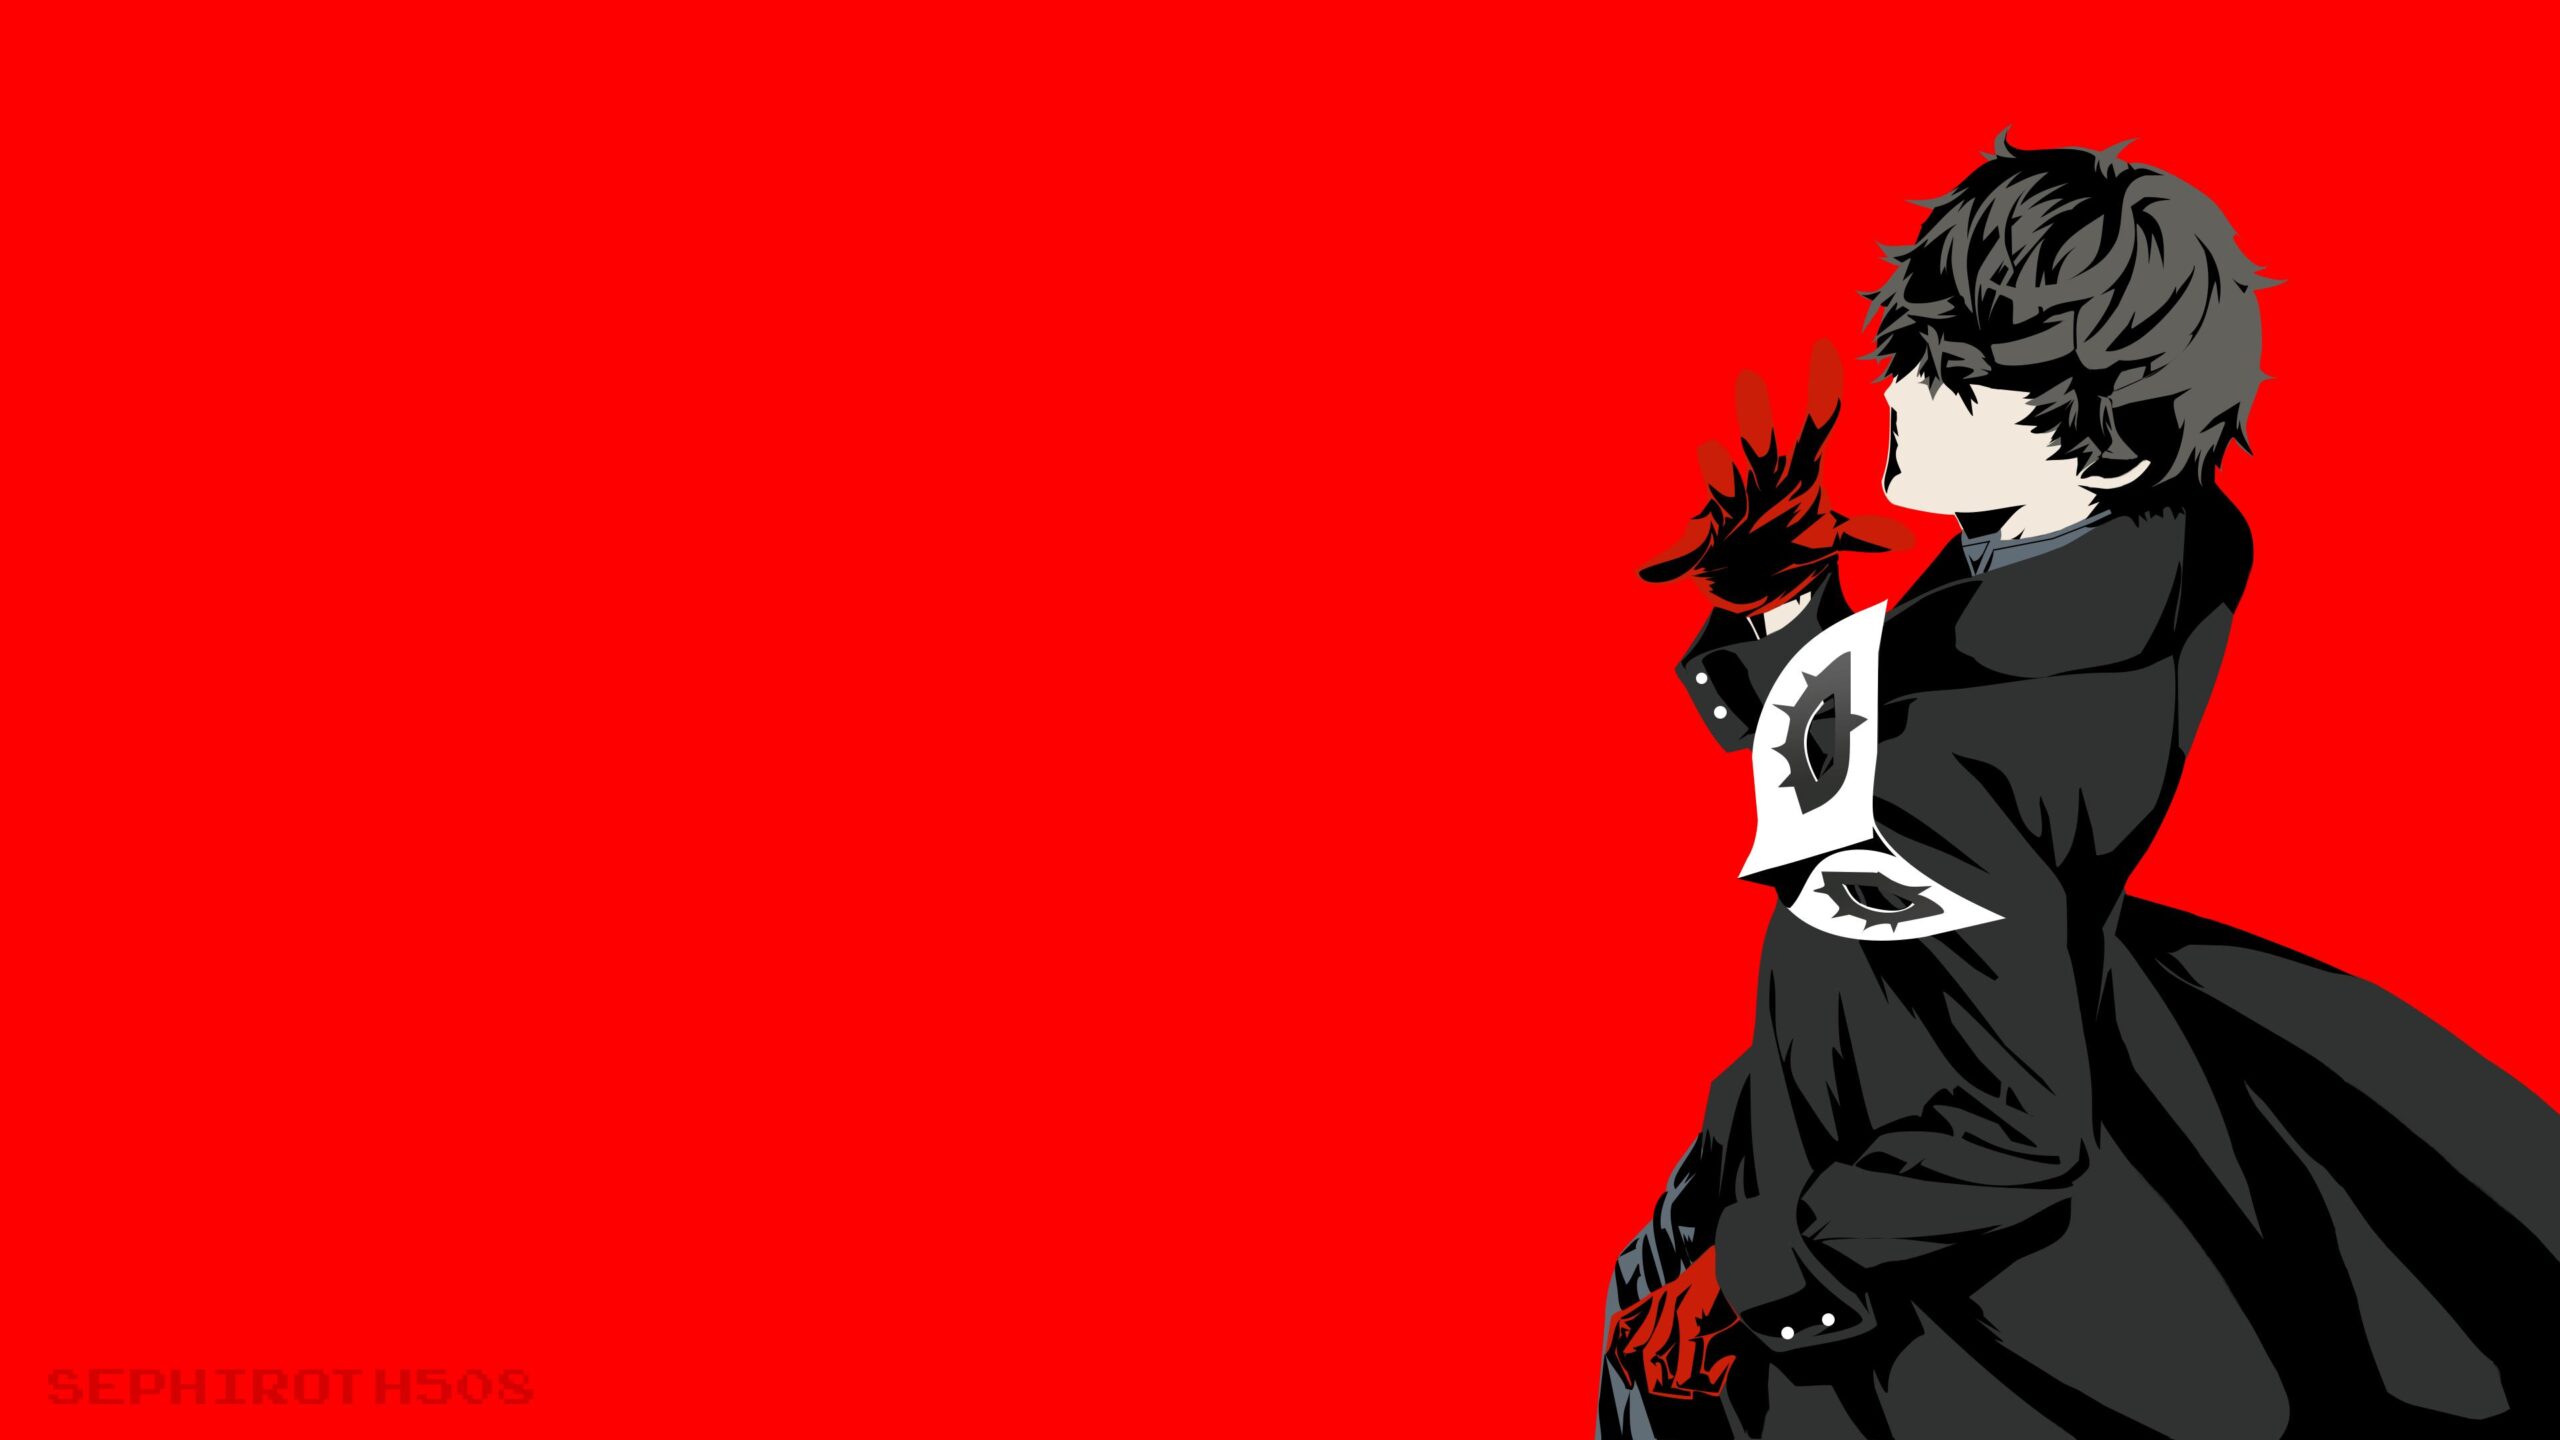 Persona 5 Hd Full Wallpapers, Persona 5, Game